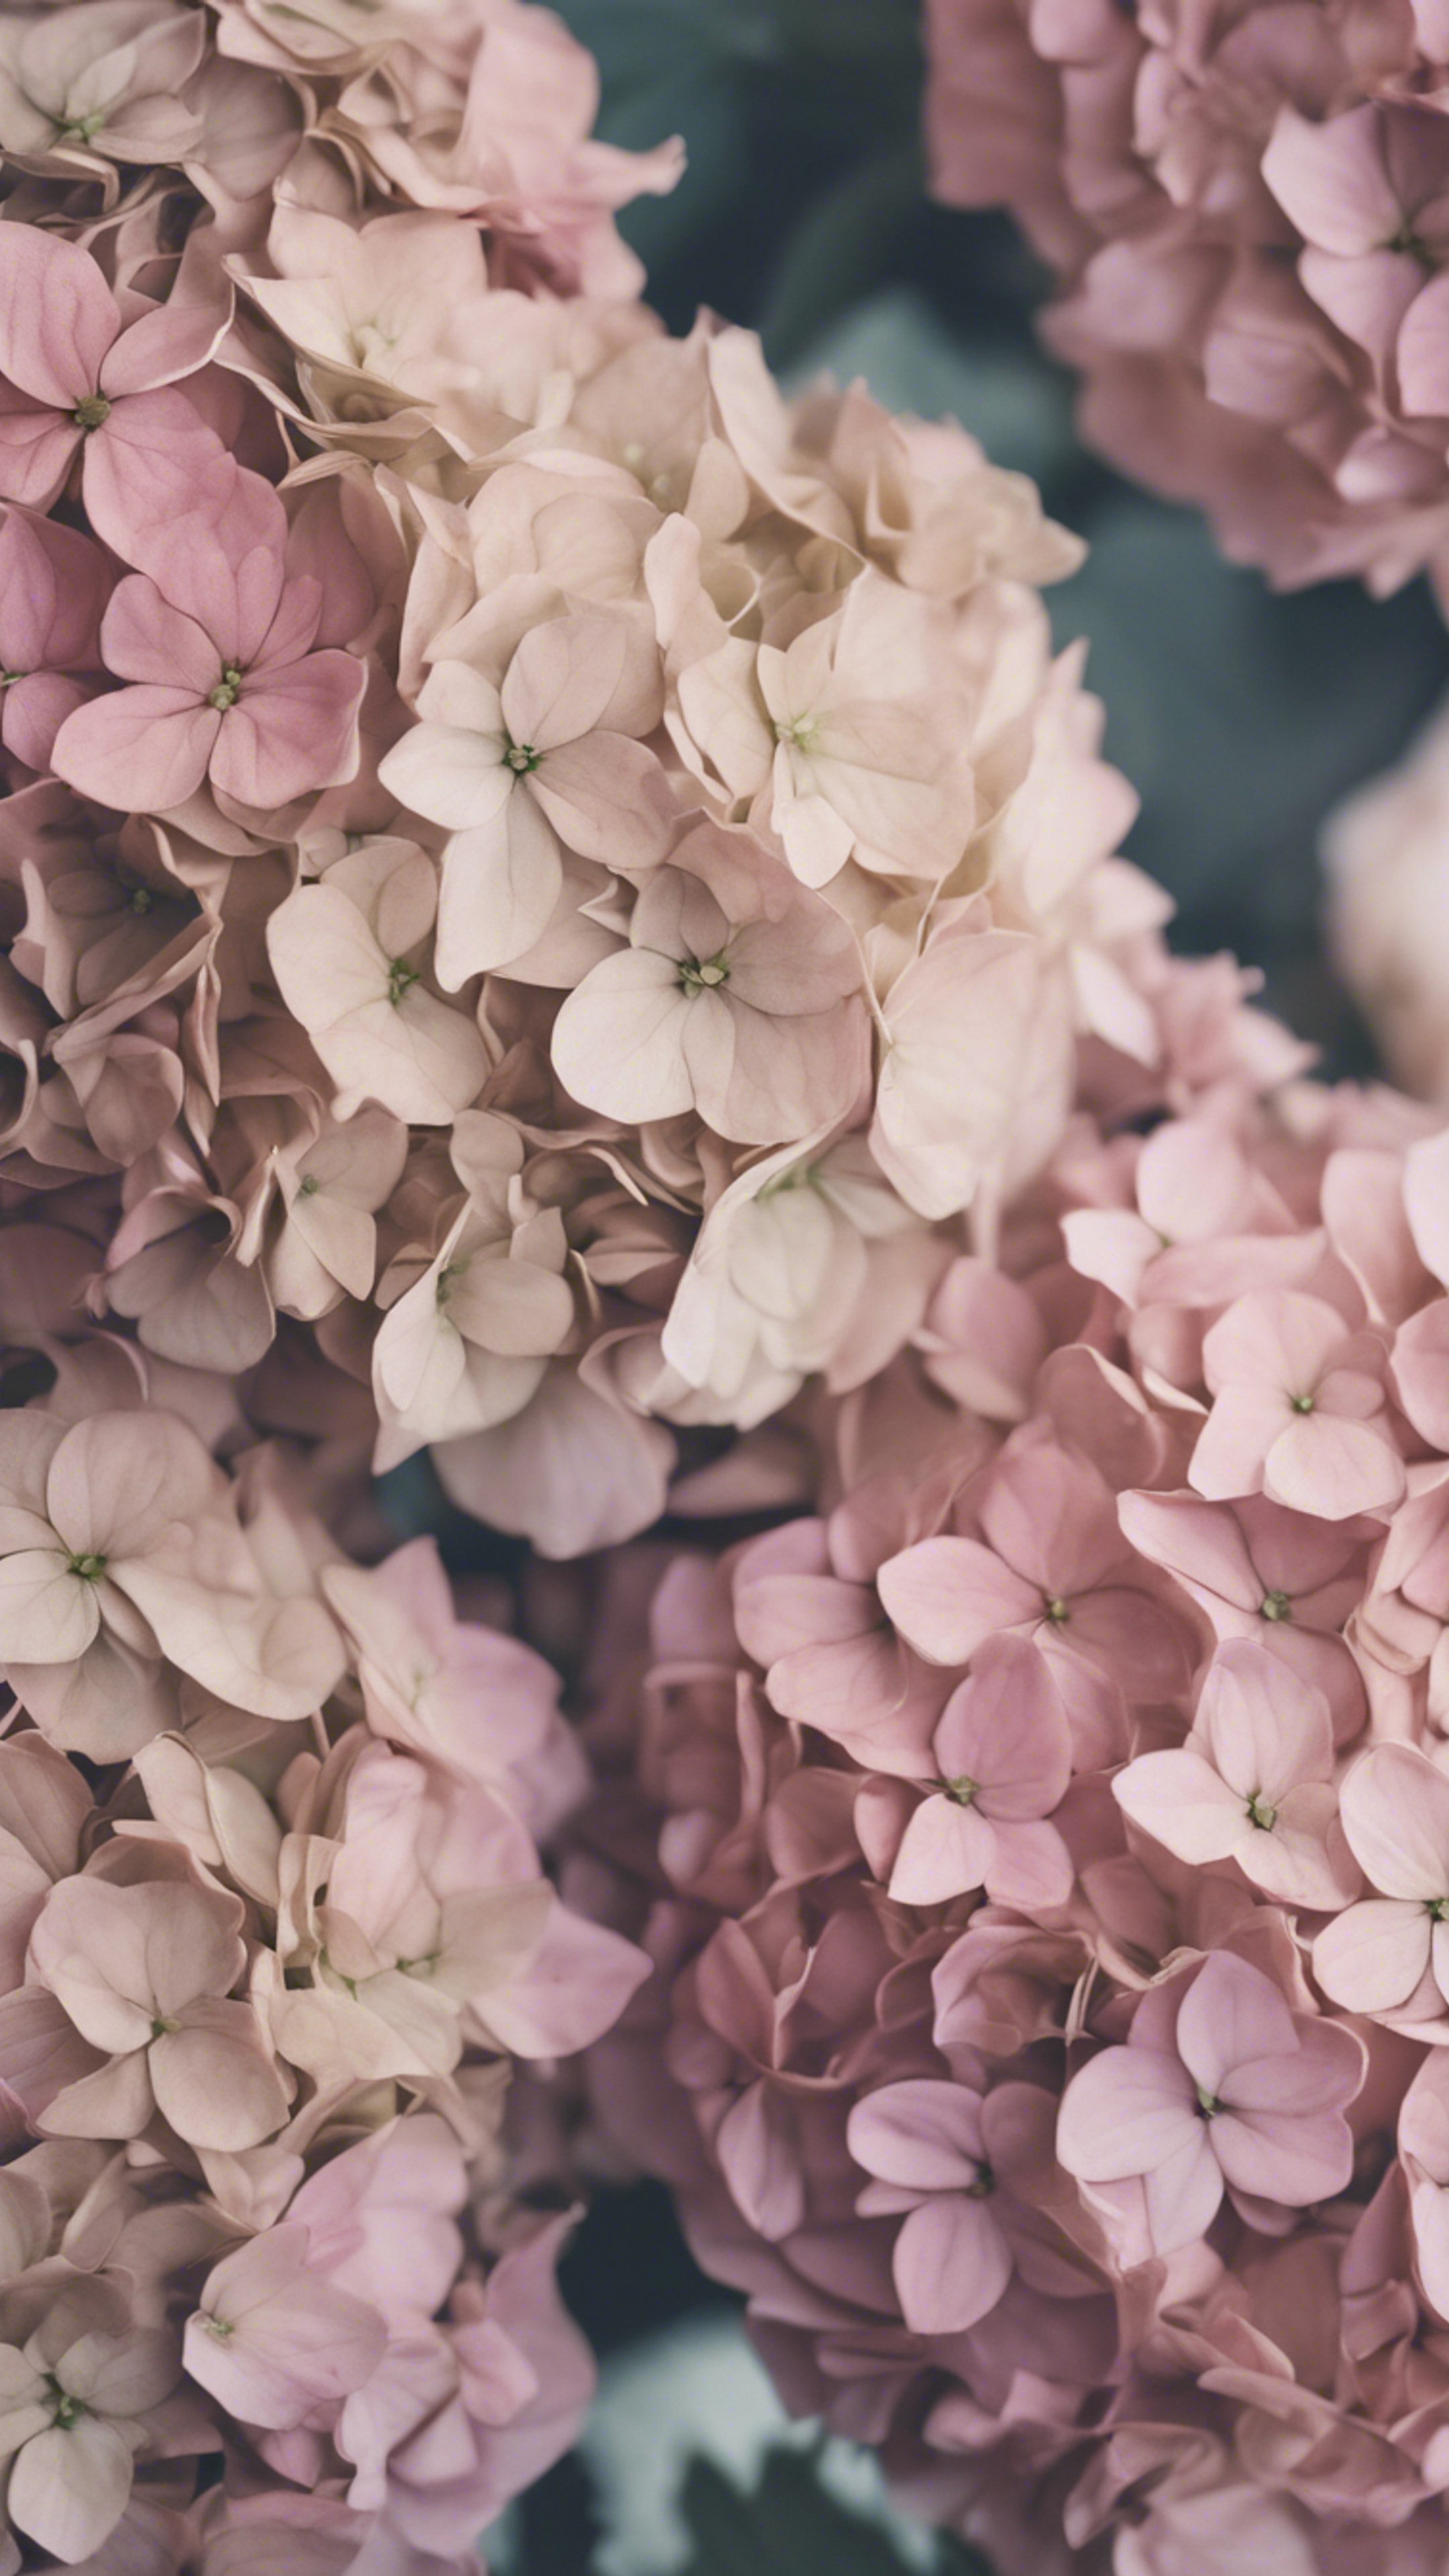 An antique floral pattern with delicate hydrangeas in a hue of vintage pink. วอลล์เปเปอร์[d61dab8ff010416797b3]